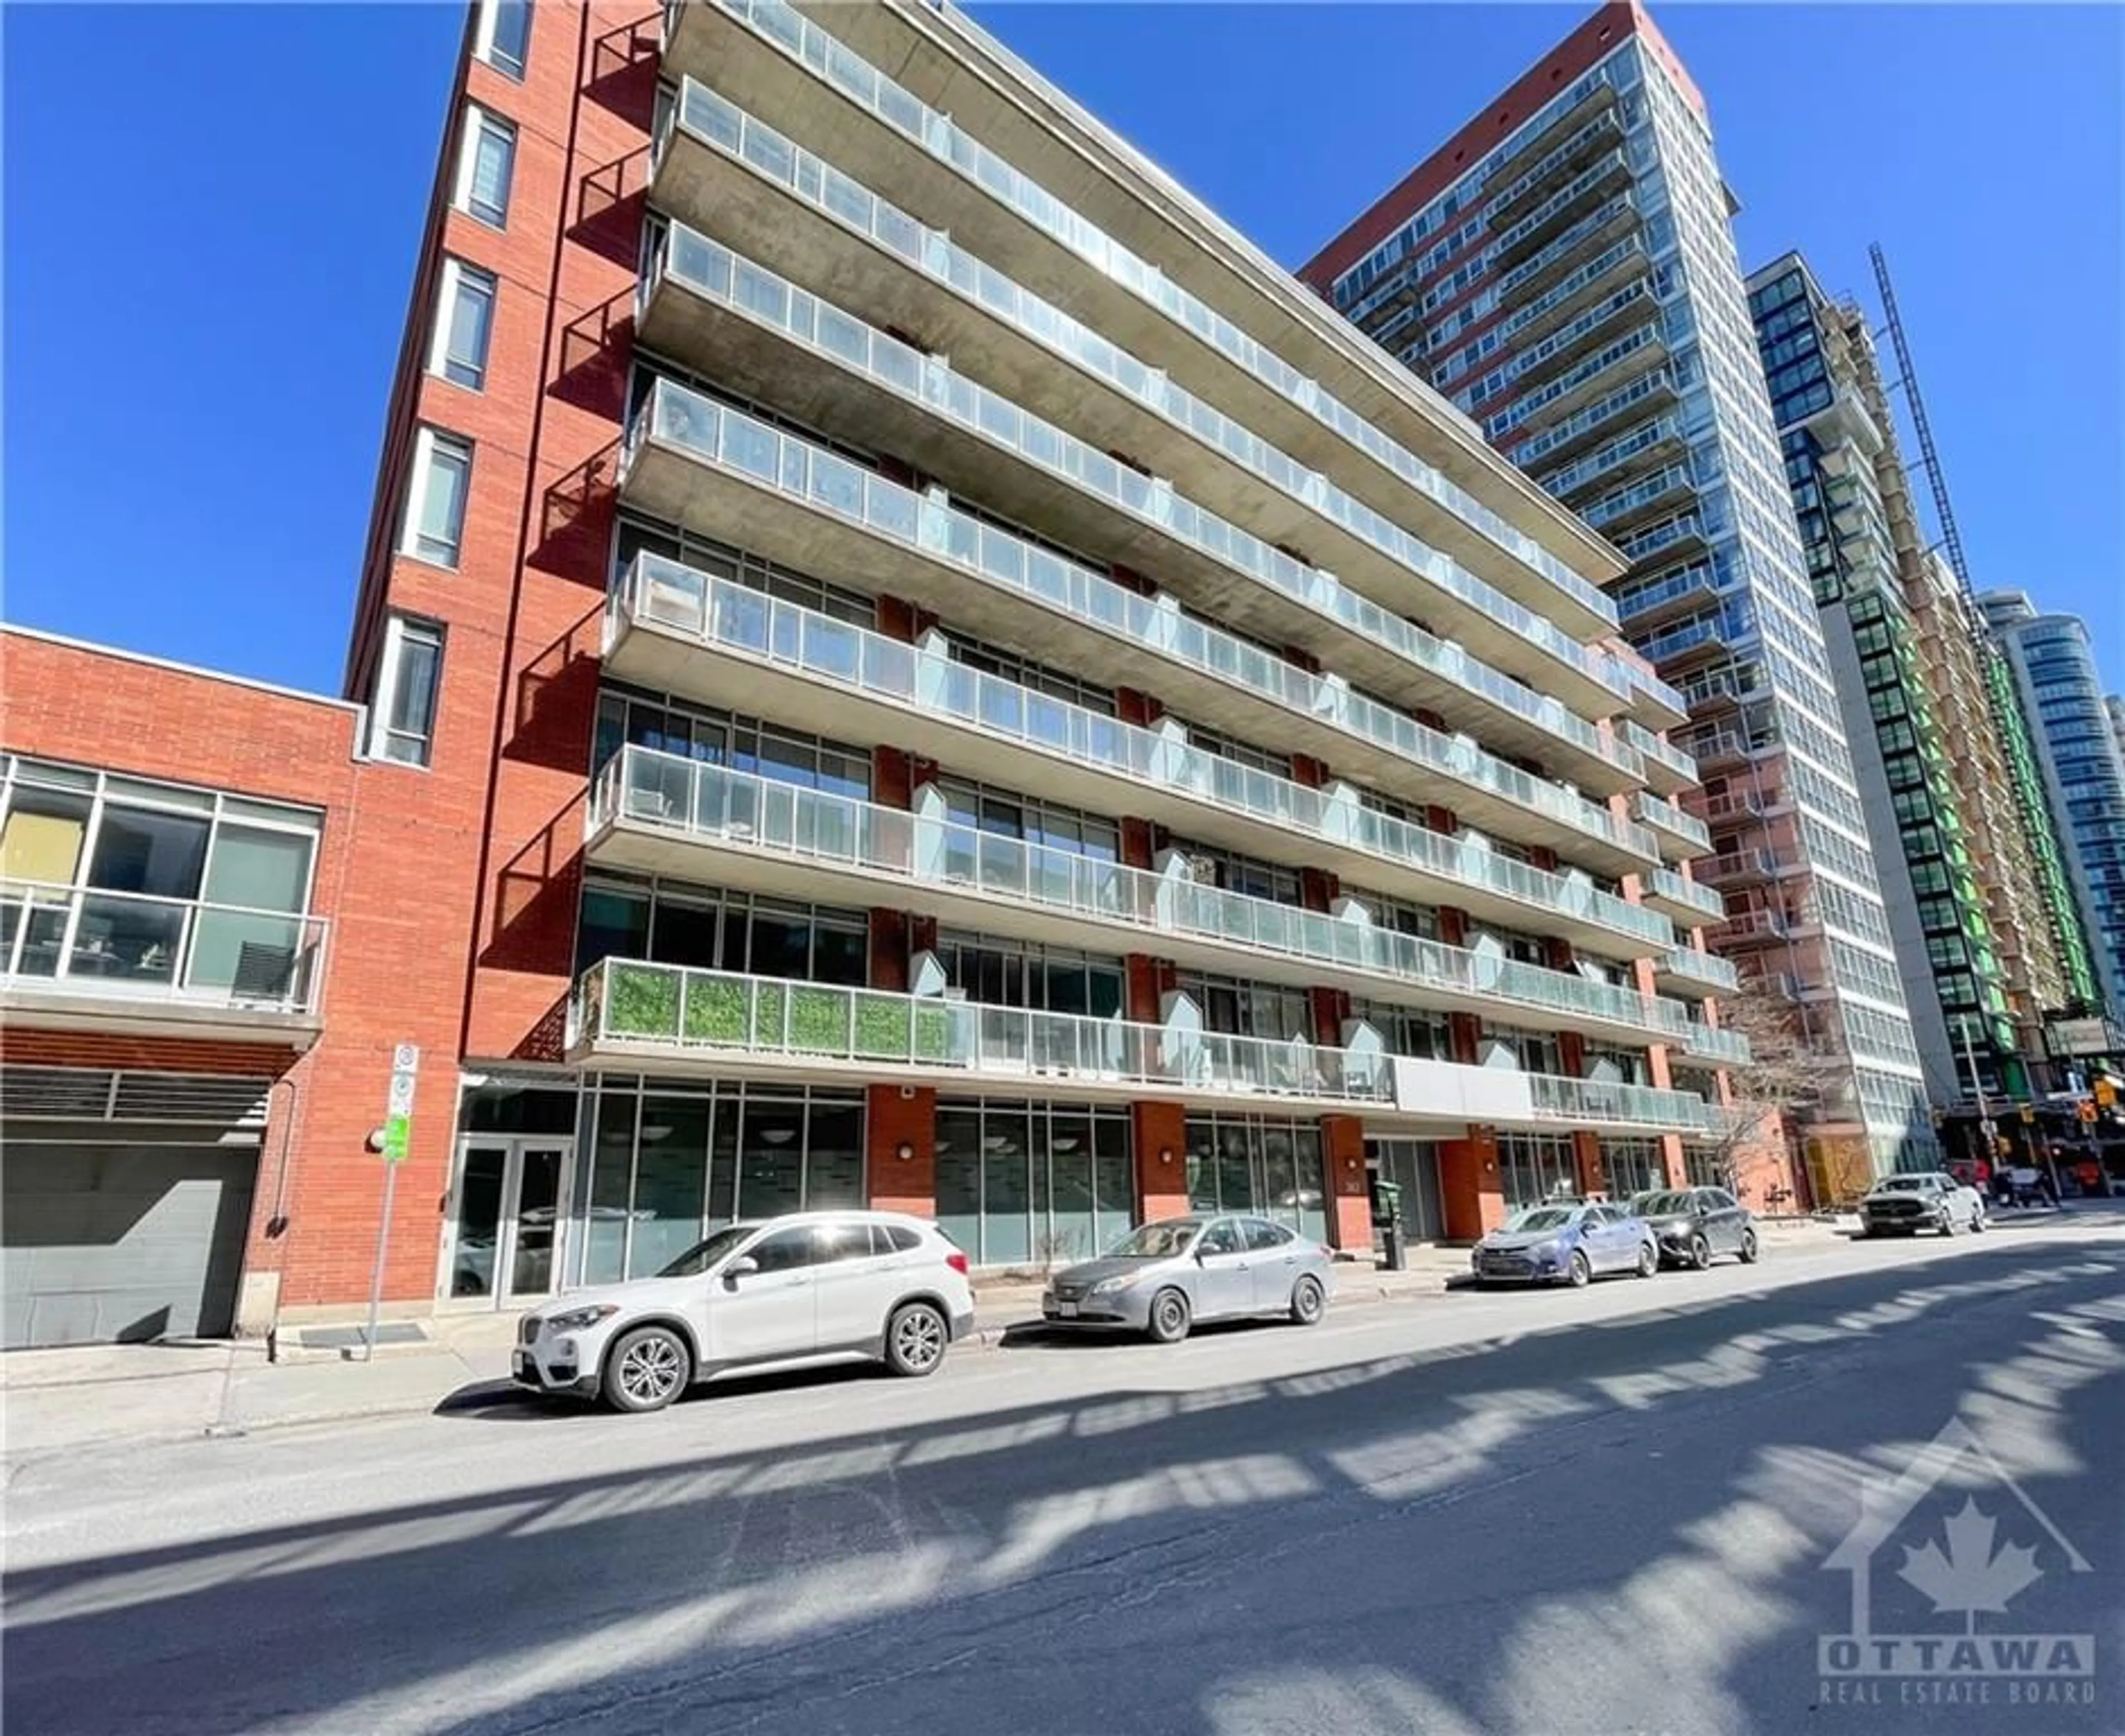 A pic from exterior of the house or condo for 383 CUMBERLAND St #708, Ottawa Ontario K1N 1J7